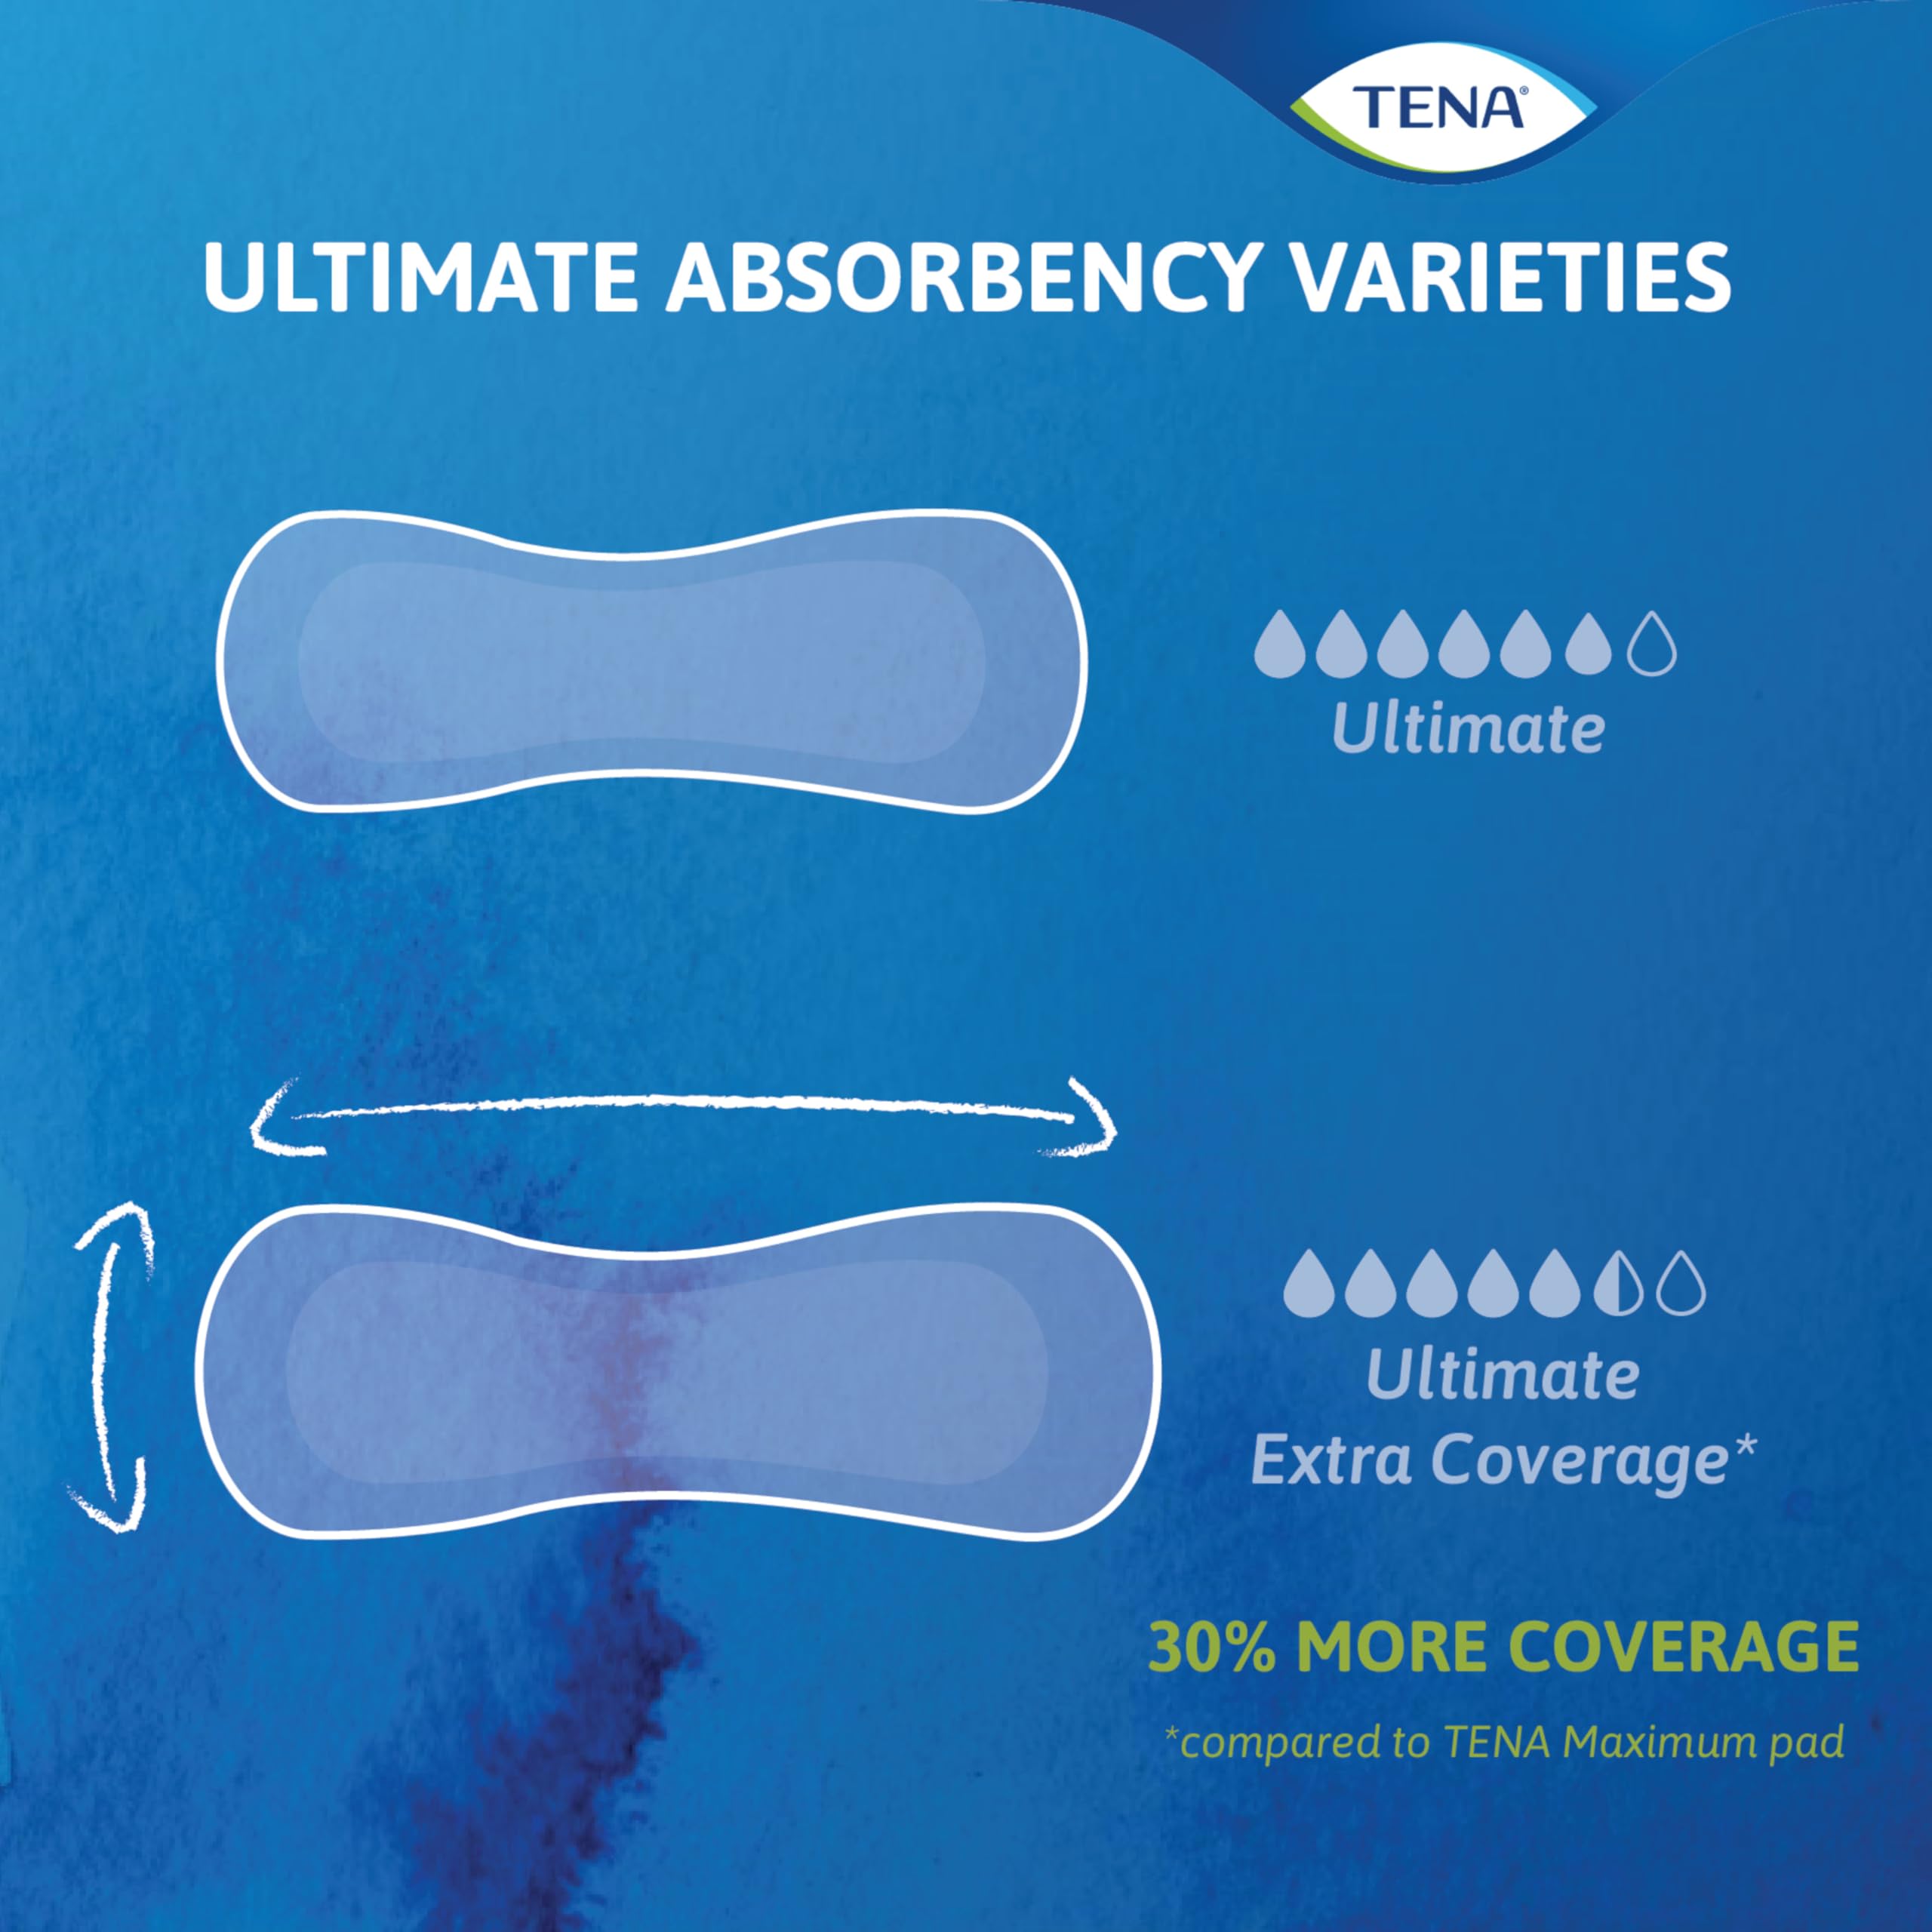 TENA Incontinence Pads, Bladder Control & Postpartum for Women, Ultimate Absorbency, Long Length, Sensitive Care - 52 Count